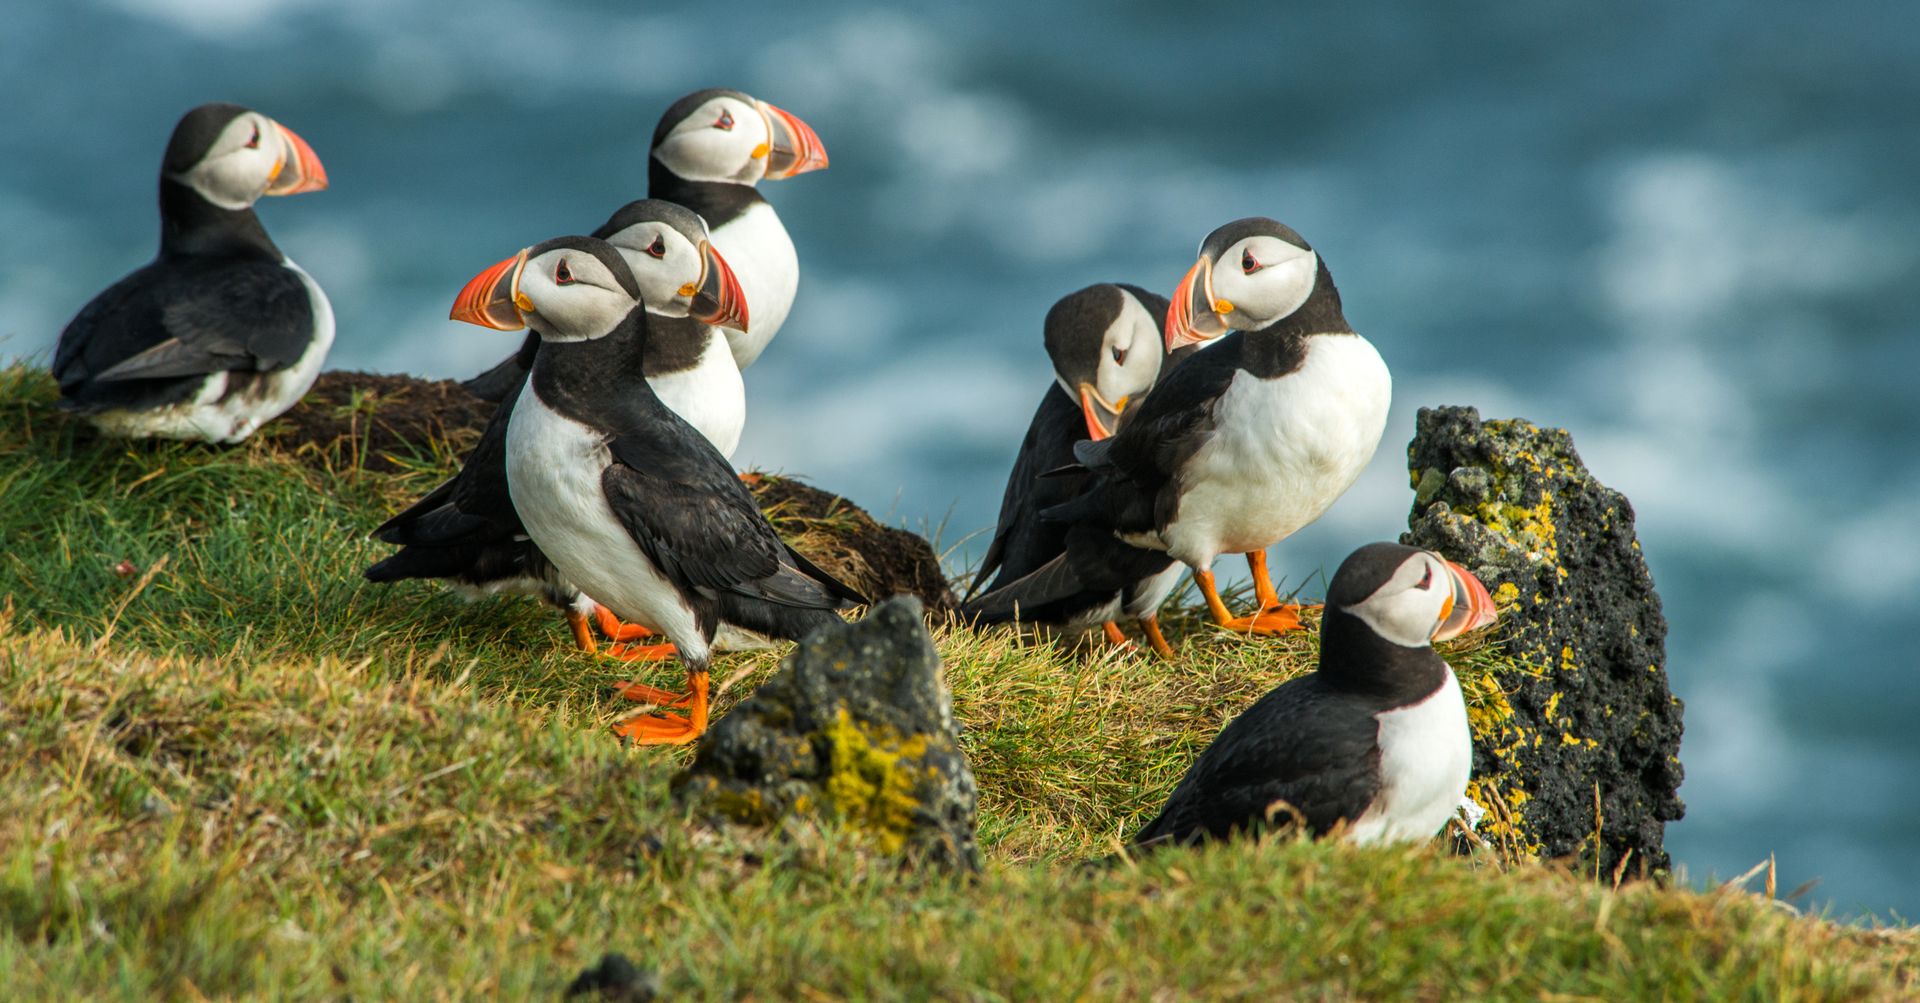 Group of Puffins in Iceland on a rock with the ocean in the background